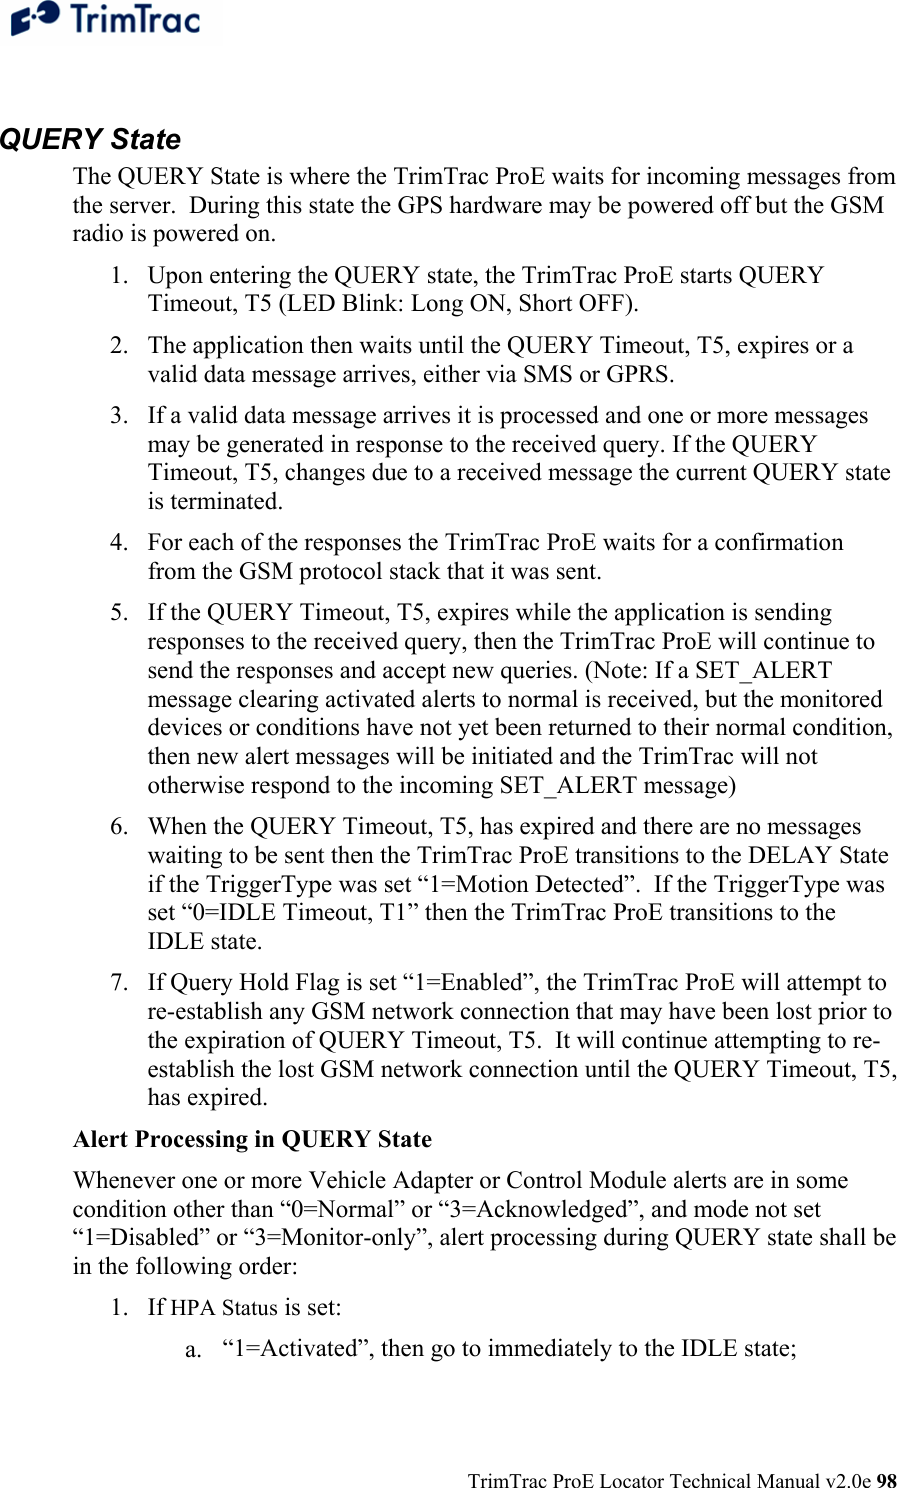  TrimTrac ProE Locator Technical Manual v2.0e 98  QUERY State The QUERY State is where the TrimTrac ProE waits for incoming messages from the server.  During this state the GPS hardware may be powered off but the GSM radio is powered on. 1. Upon entering the QUERY state, the TrimTrac ProE starts QUERY Timeout, T5 (LED Blink: Long ON, Short OFF). 2. The application then waits until the QUERY Timeout, T5, expires or a valid data message arrives, either via SMS or GPRS. 3. If a valid data message arrives it is processed and one or more messages may be generated in response to the received query. If the QUERY Timeout, T5, changes due to a received message the current QUERY state is terminated.  4. For each of the responses the TrimTrac ProE waits for a confirmation from the GSM protocol stack that it was sent. 5. If the QUERY Timeout, T5, expires while the application is sending responses to the received query, then the TrimTrac ProE will continue to send the responses and accept new queries. (Note: If a SET_ALERT message clearing activated alerts to normal is received, but the monitored devices or conditions have not yet been returned to their normal condition, then new alert messages will be initiated and the TrimTrac will not otherwise respond to the incoming SET_ALERT message) 6. When the QUERY Timeout, T5, has expired and there are no messages waiting to be sent then the TrimTrac ProE transitions to the DELAY State if the TriggerType was set “1=Motion Detected”.  If the TriggerType was set “0=IDLE Timeout, T1” then the TrimTrac ProE transitions to the IDLE state. 7. If Query Hold Flag is set “1=Enabled”, the TrimTrac ProE will attempt to re-establish any GSM network connection that may have been lost prior to the expiration of QUERY Timeout, T5.  It will continue attempting to re-establish the lost GSM network connection until the QUERY Timeout, T5, has expired. Alert Processing in QUERY State Whenever one or more Vehicle Adapter or Control Module alerts are in some condition other than “0=Normal” or “3=Acknowledged”, and mode not set “1=Disabled” or “3=Monitor-only”, alert processing during QUERY state shall be in the following order: 1. If HPA Status is set: a. “1=Activated”, then go to immediately to the IDLE state; 